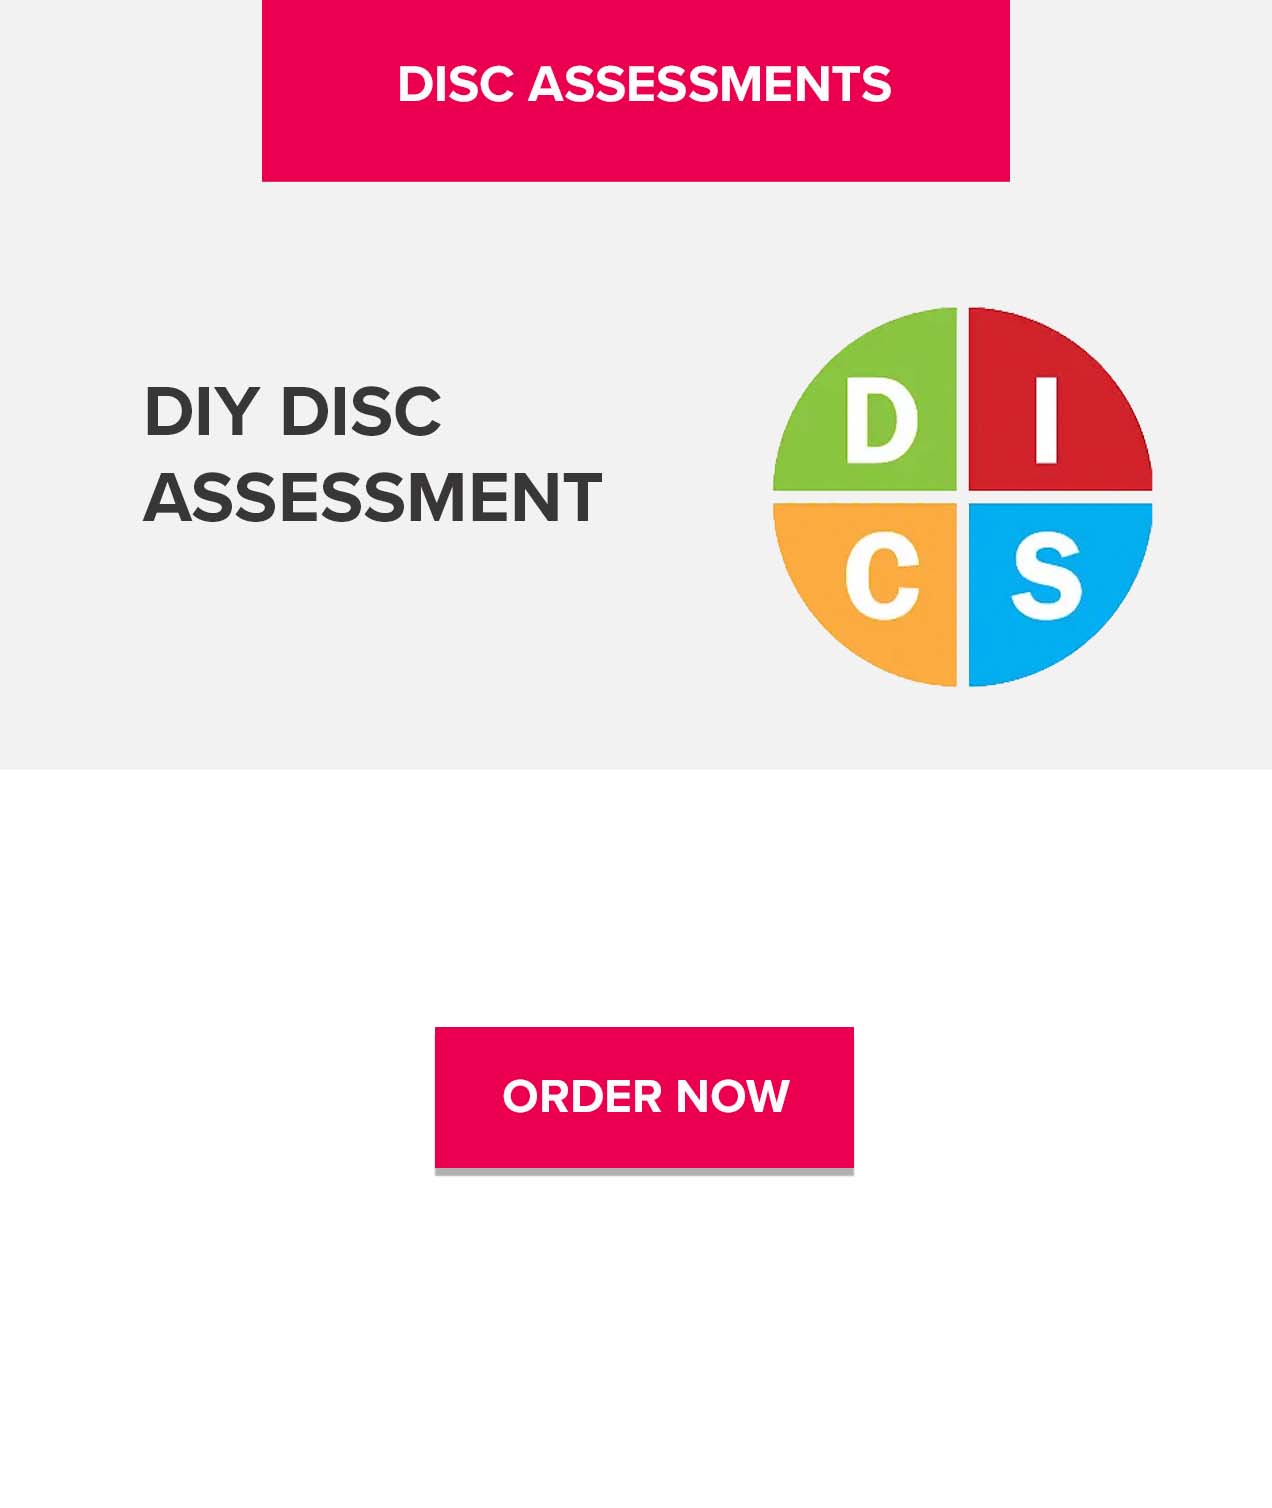 DISC Assessments for individuals